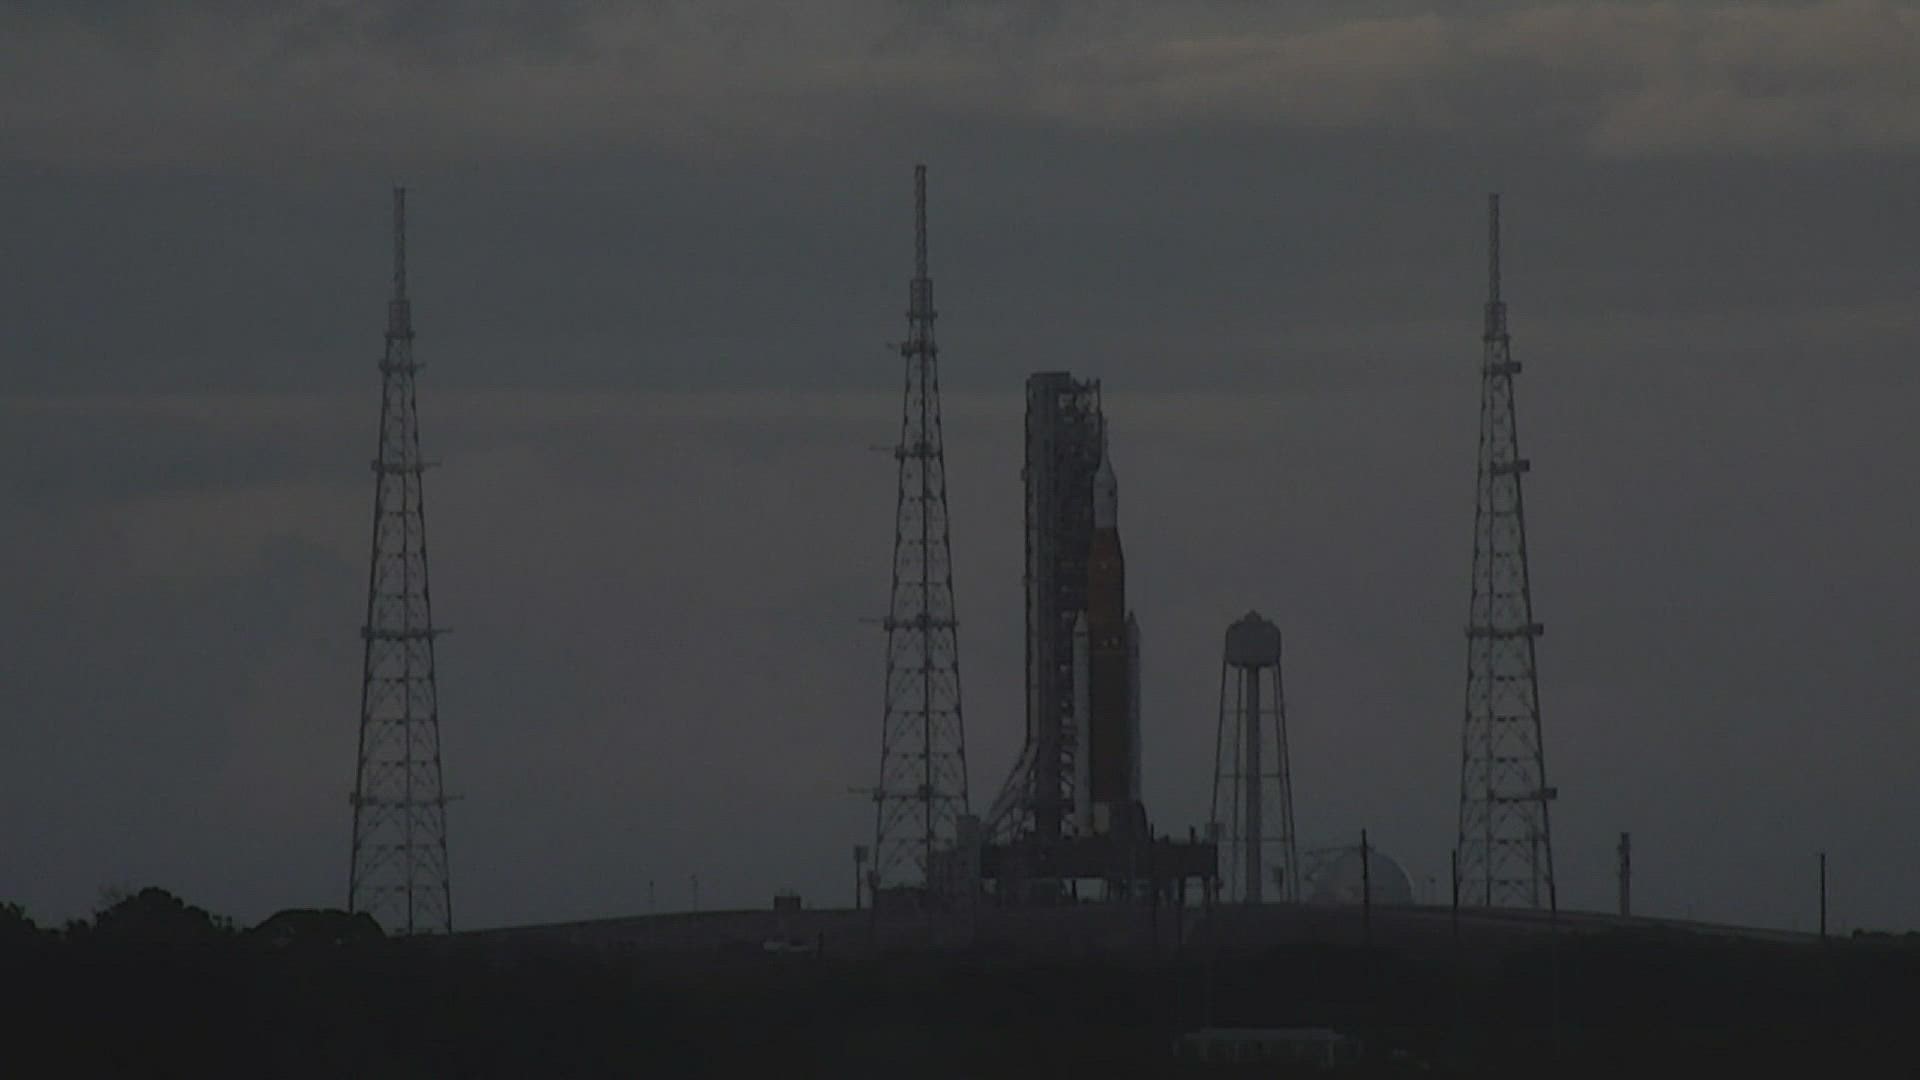 The launch has already been delayed three times. NASA released the update after it left a rocket on a launch pad during Hurricane Nicole.